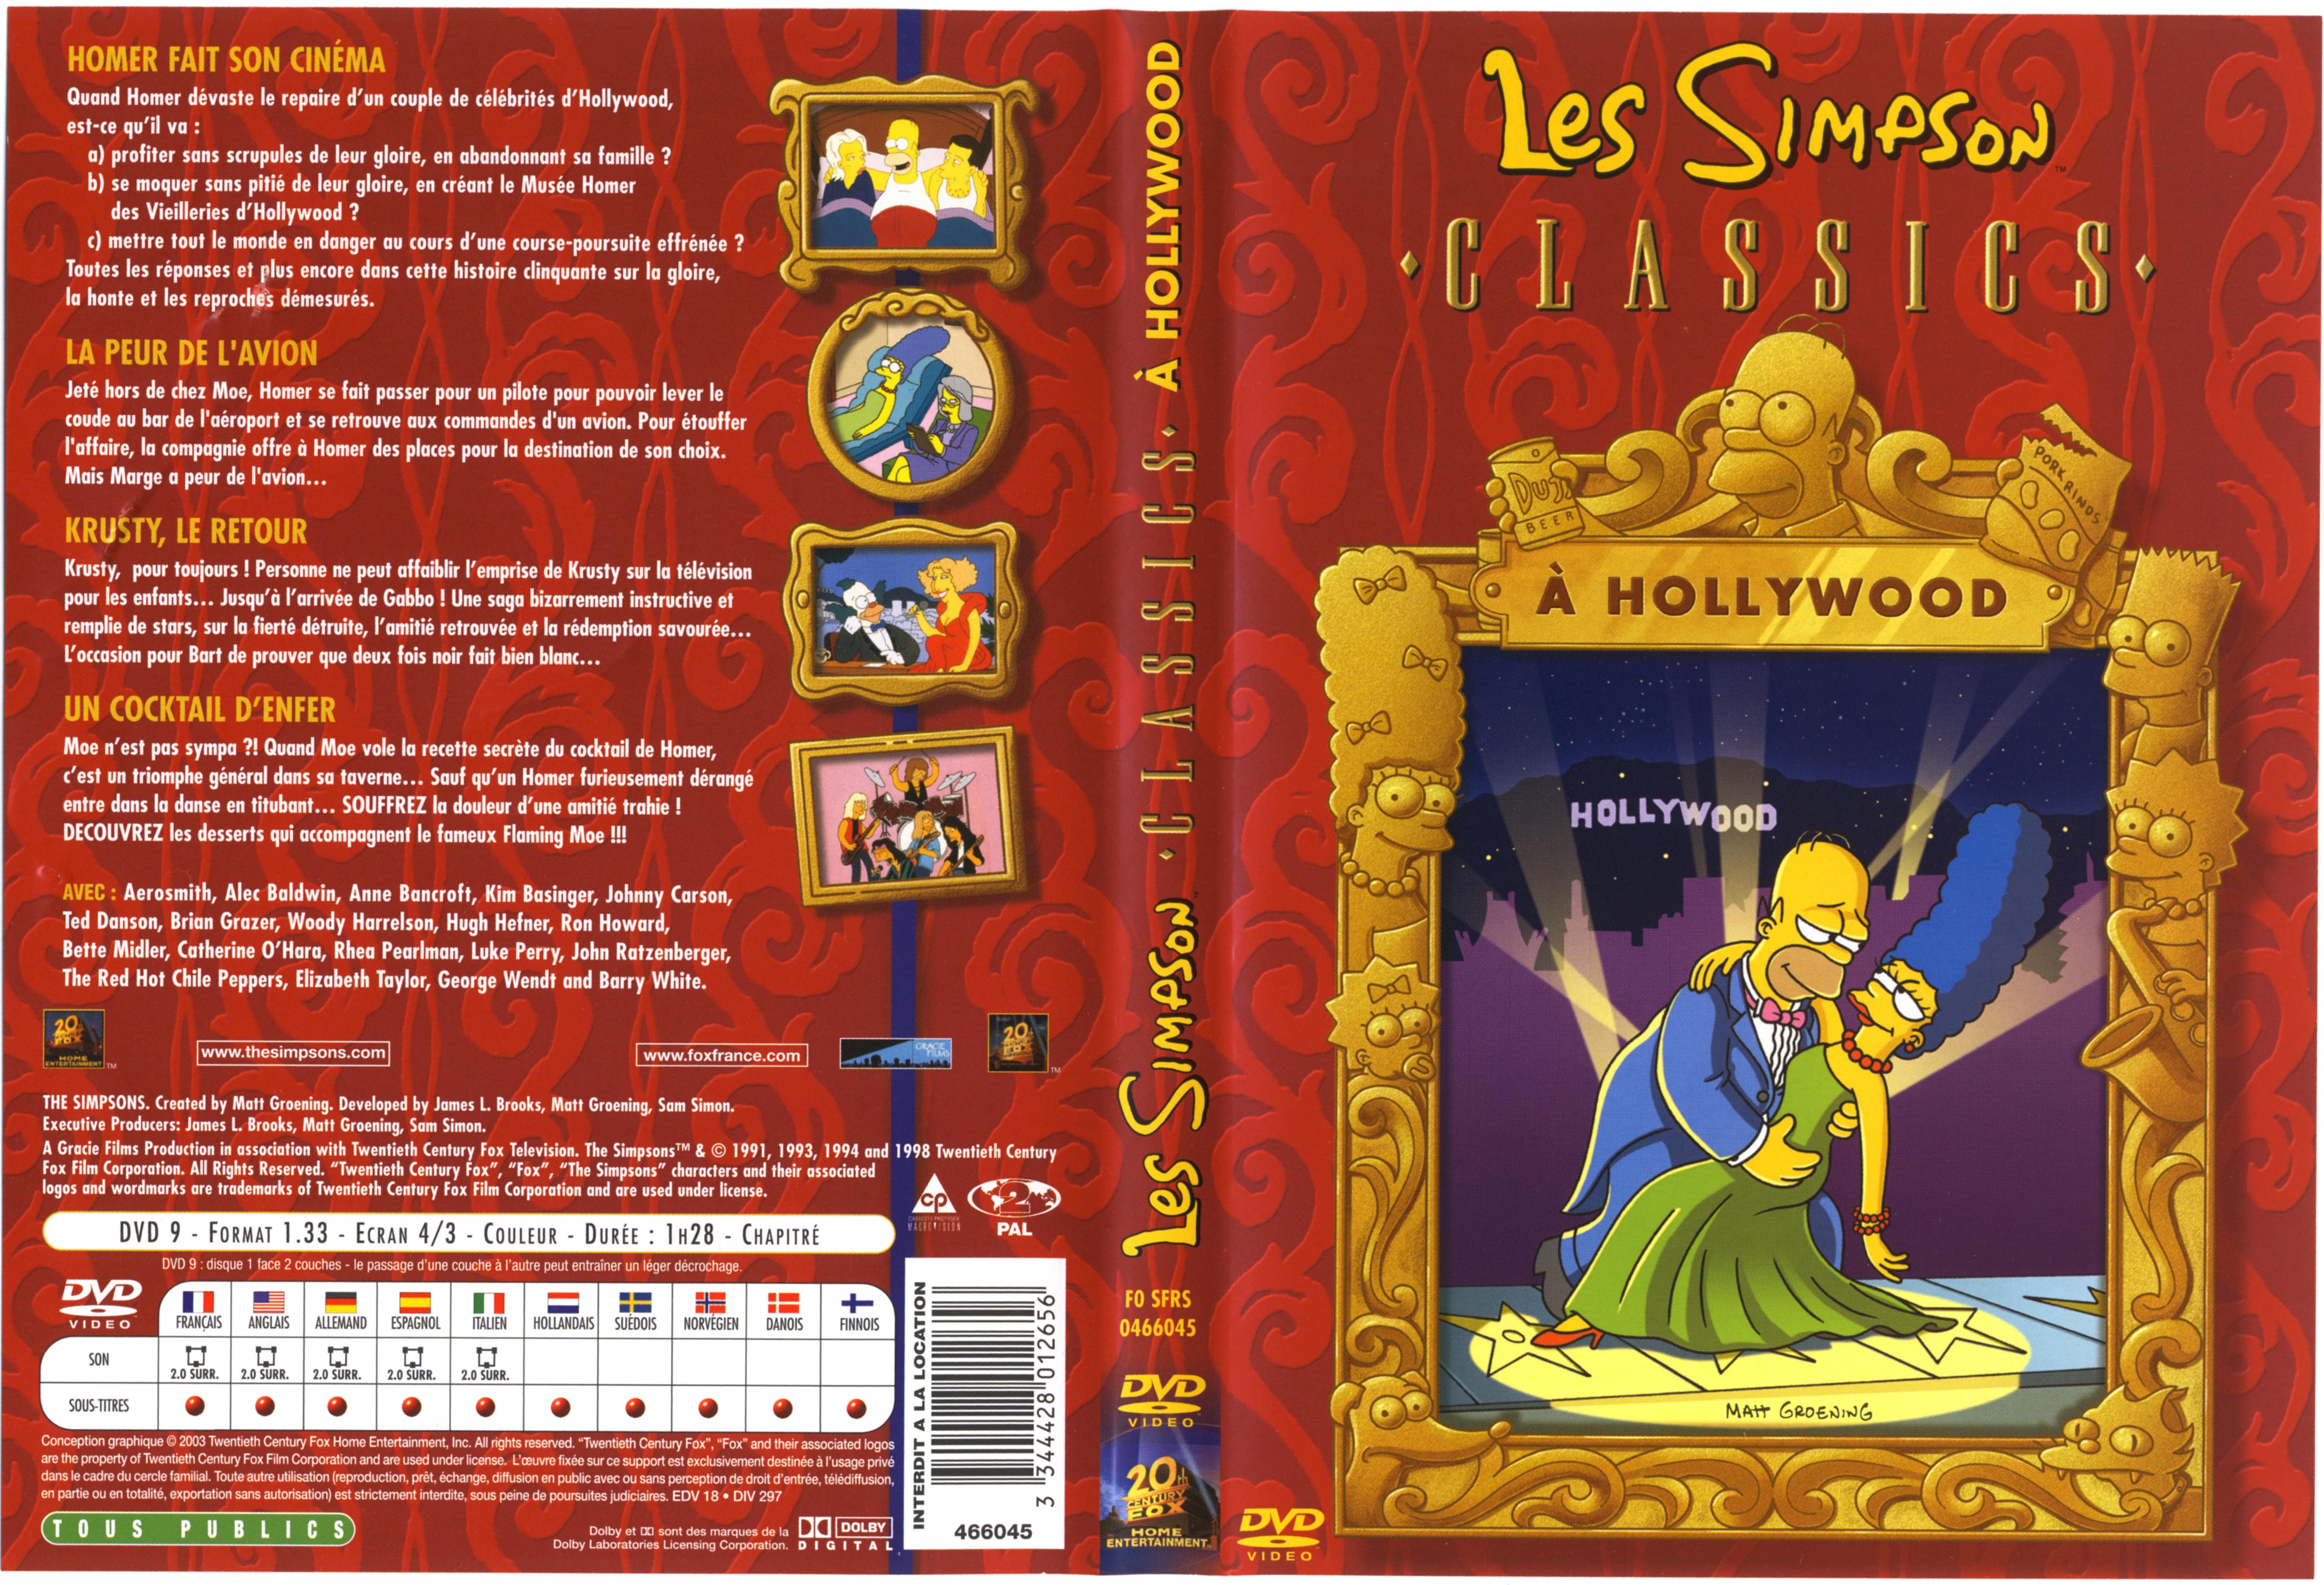 Jaquette DVD Les simpsons  Hollywood